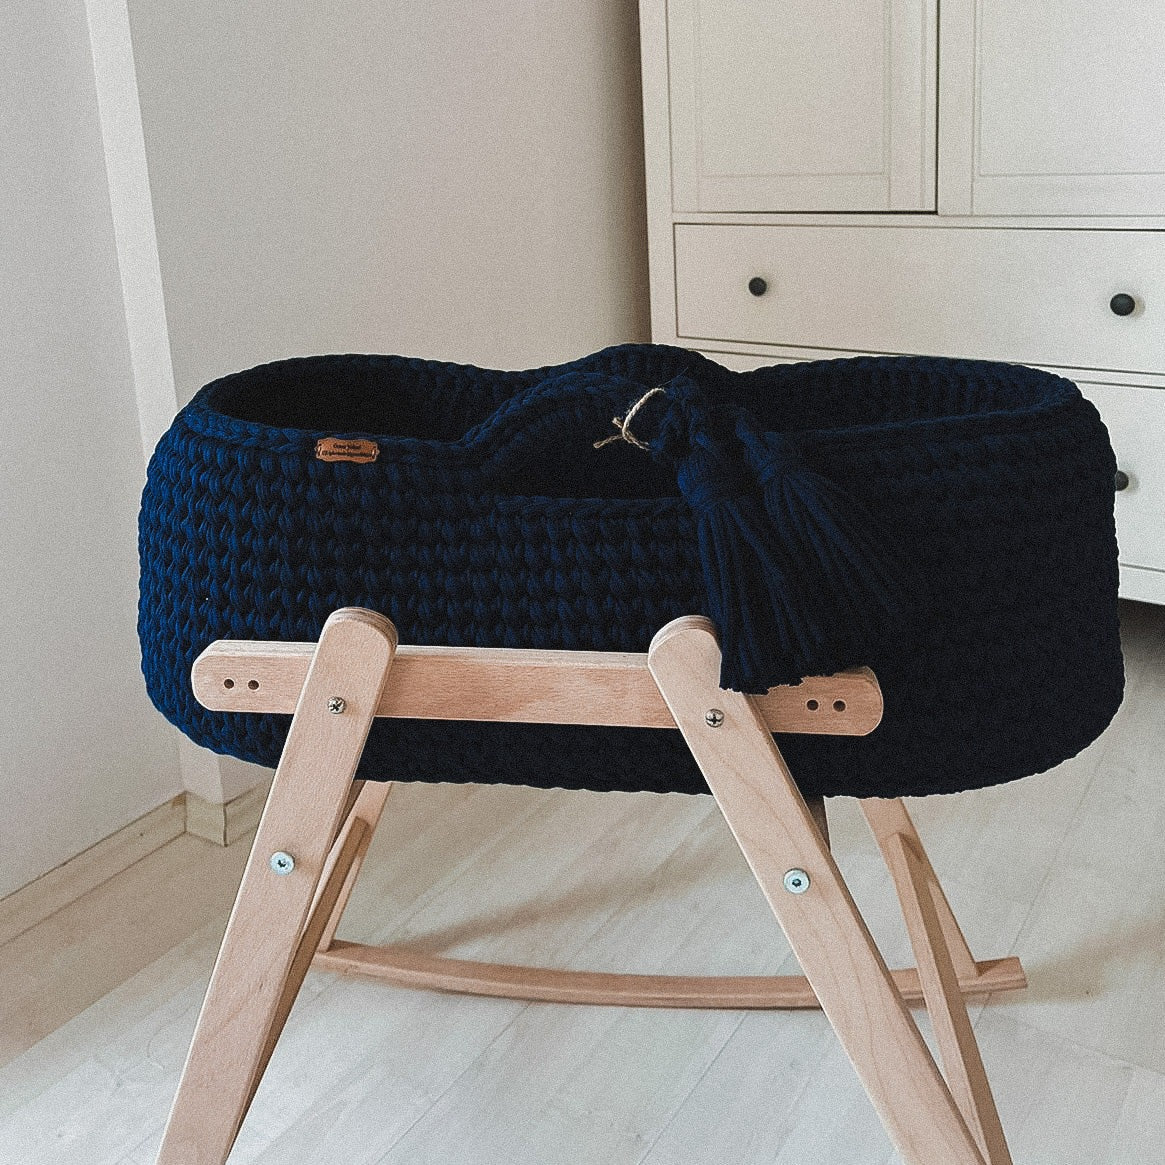 Angel Hand-Knitted Baby Bassinet - Navy